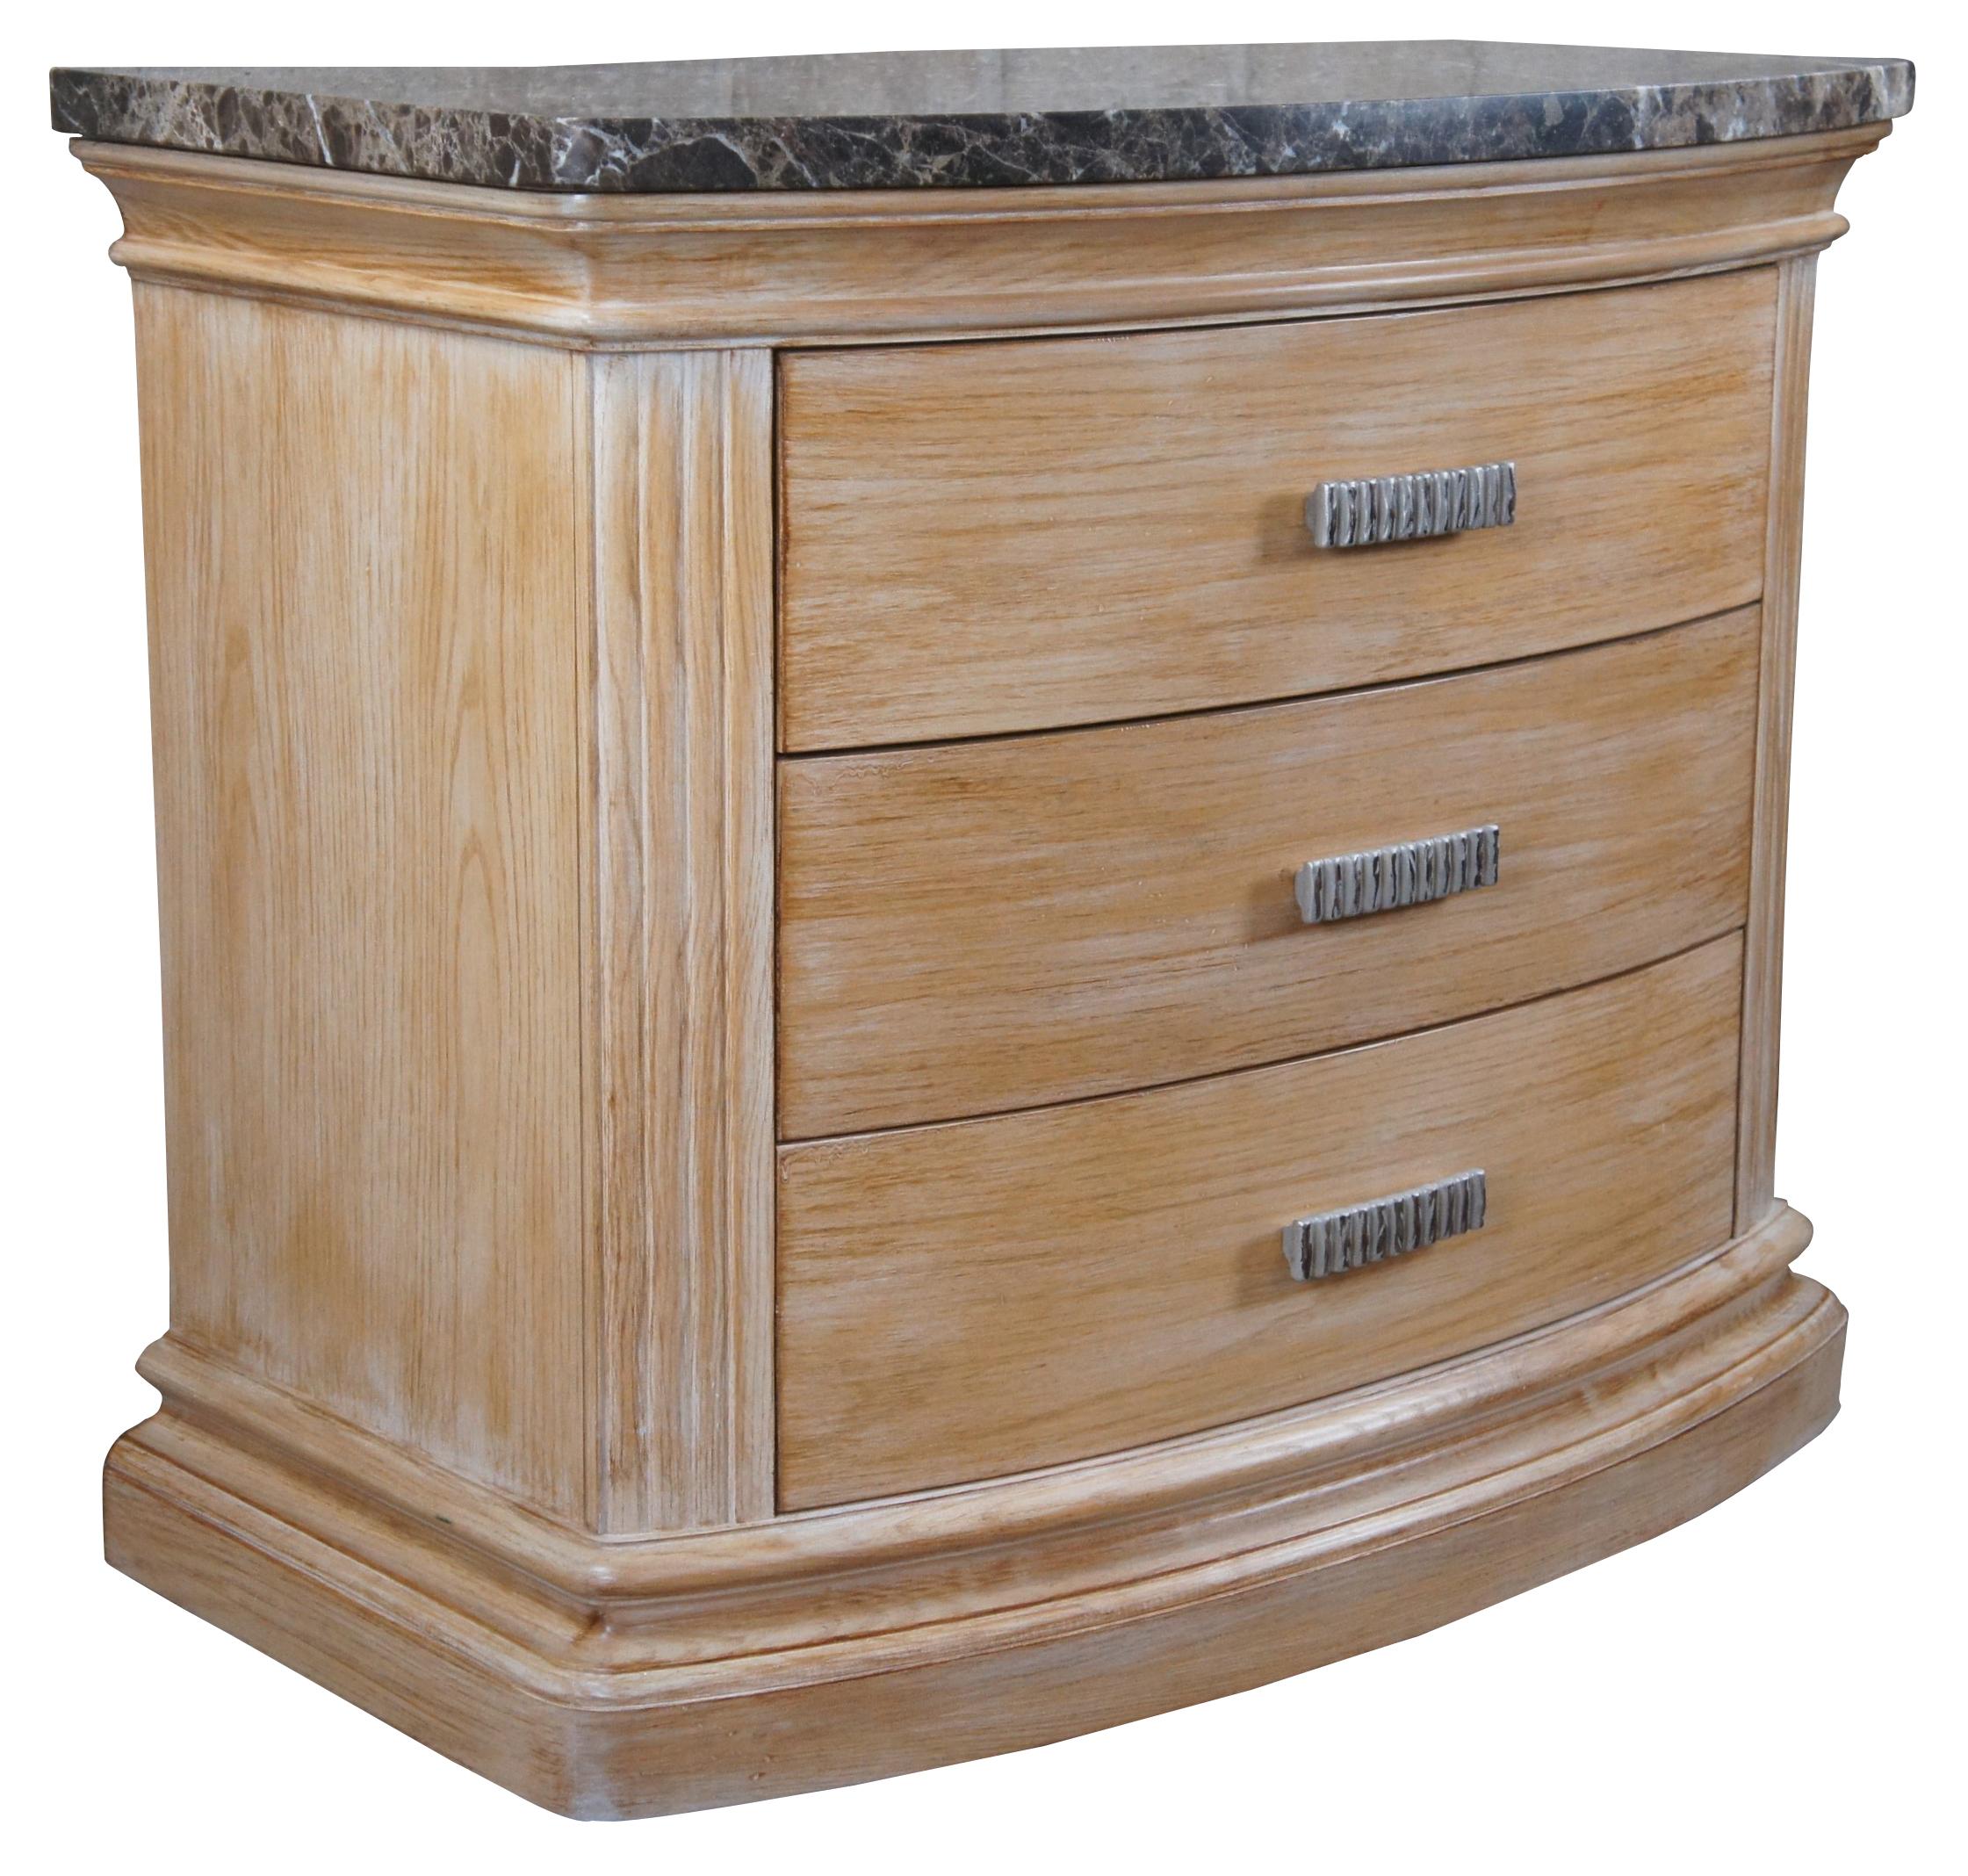 Hickory White Odyssey Collection modern bedside table. A demilune form made from pickled oak with three dovetailed drawers and a granite top.